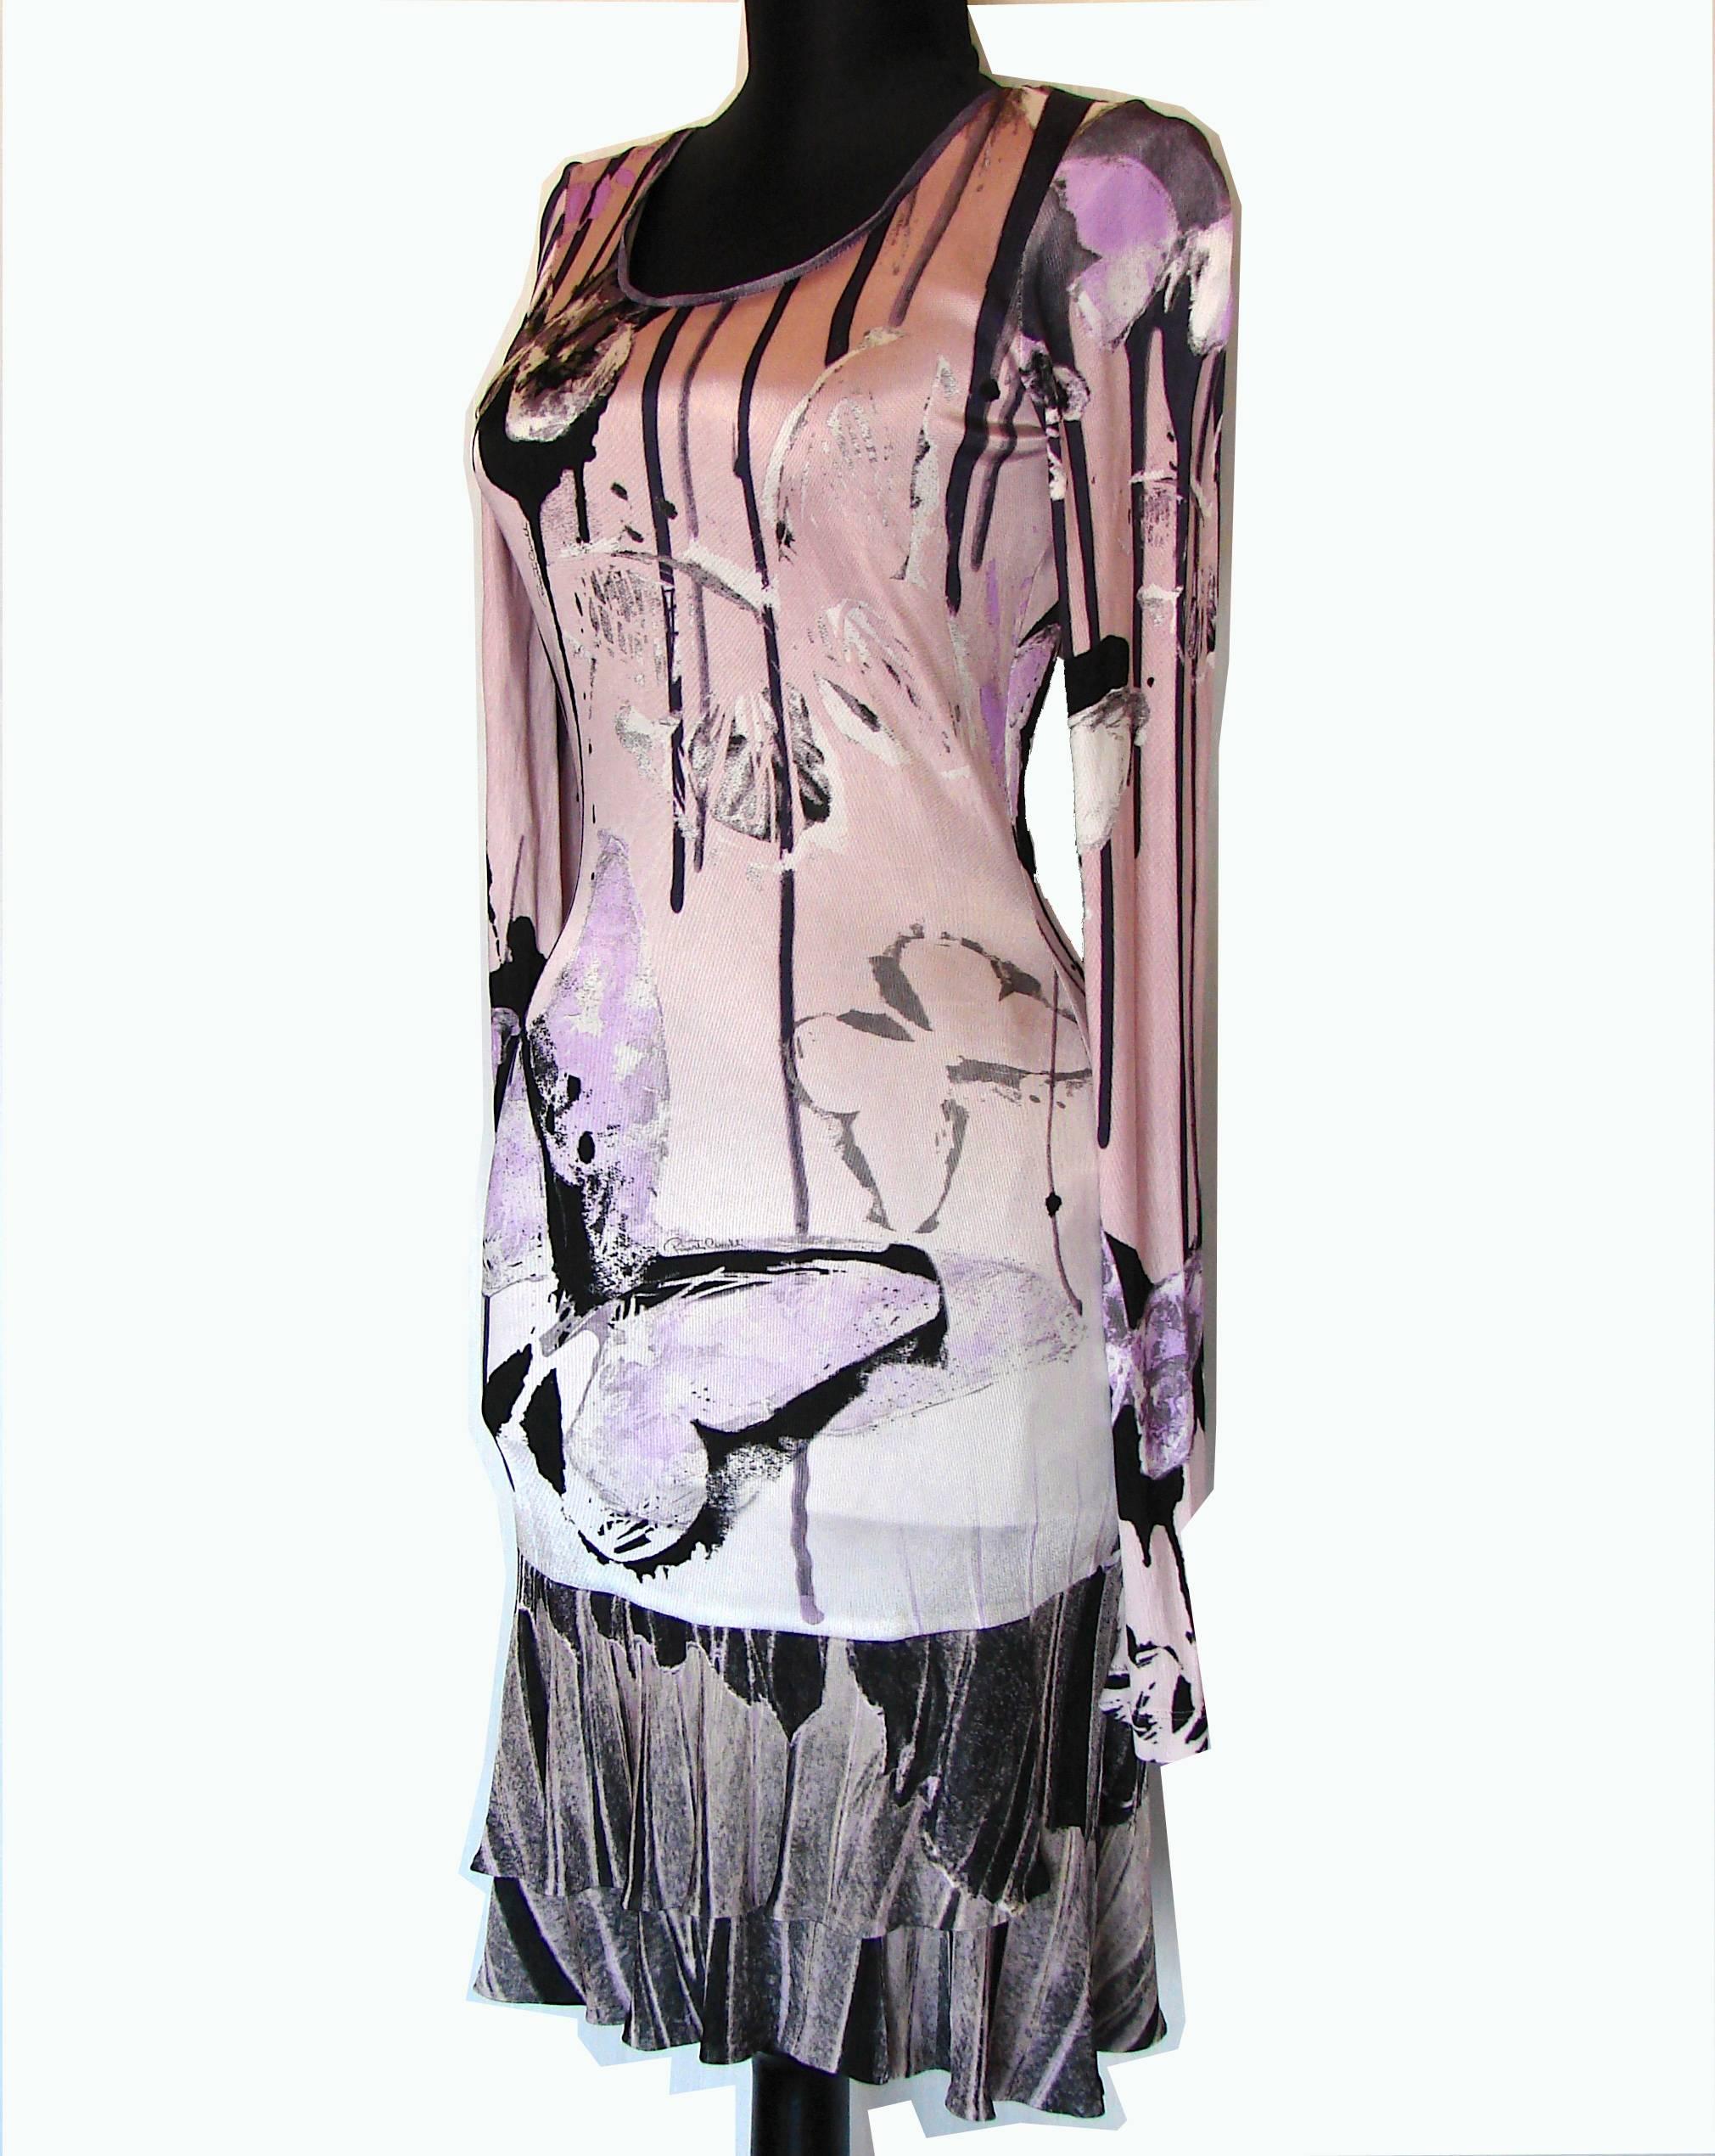 An incredibly chic dress from Roberto Cavalli, features an abstract butterfly print in shades of lavender, black and white.  Slips over the head and unlined.  In excellent pre-owned condition.  Measurements: shoulders - 16